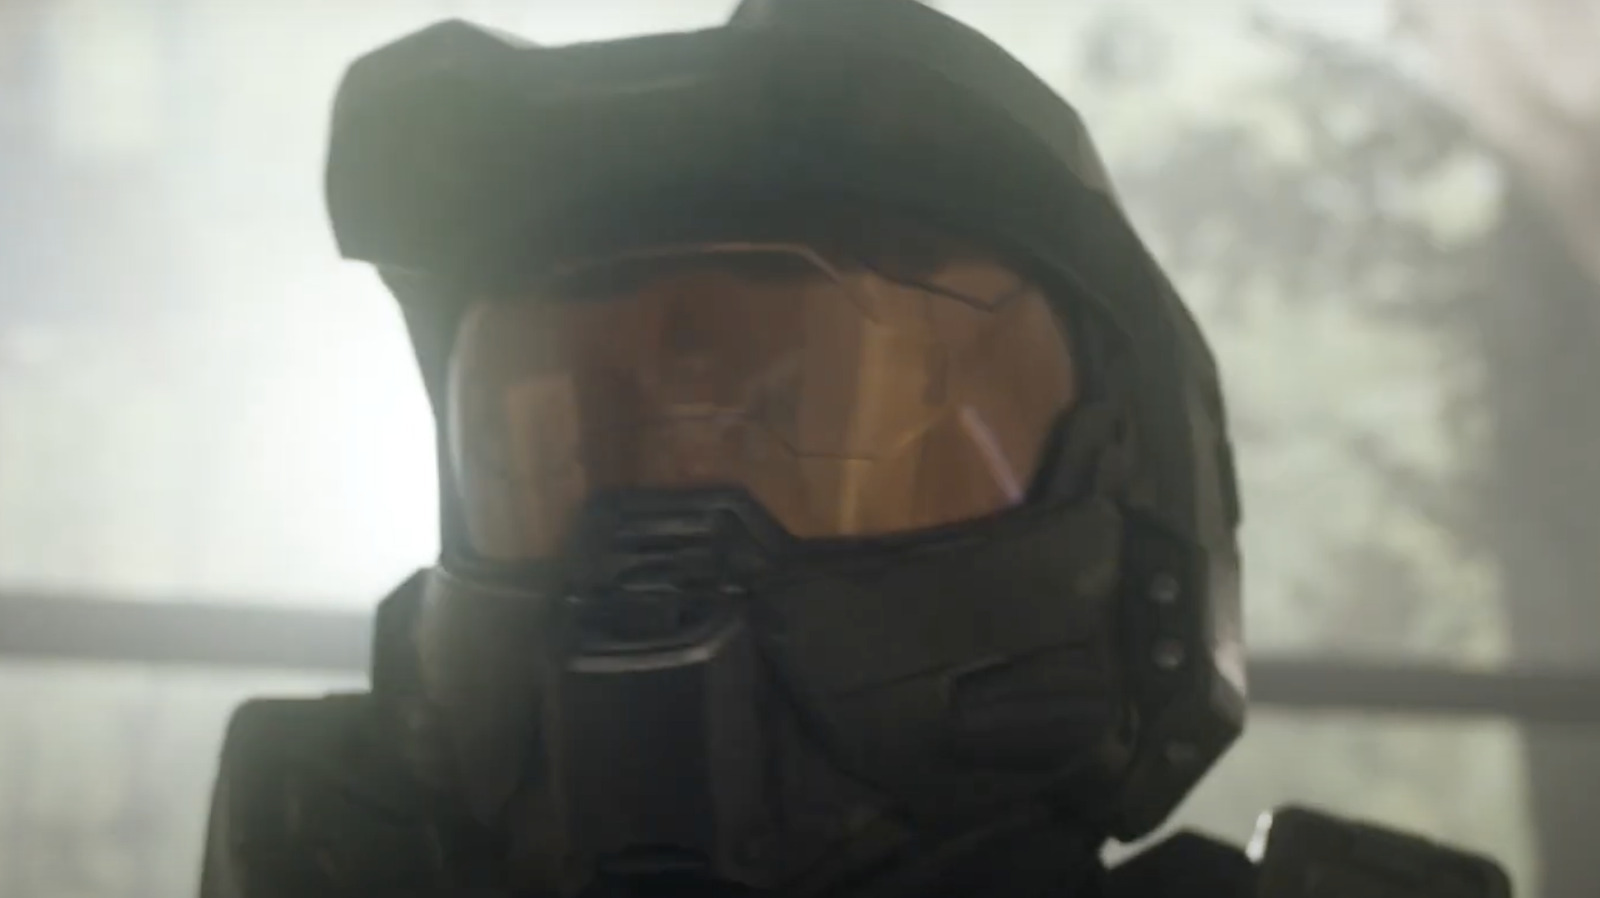 Here's the trailer for the Halo TV series, including a new Cortana